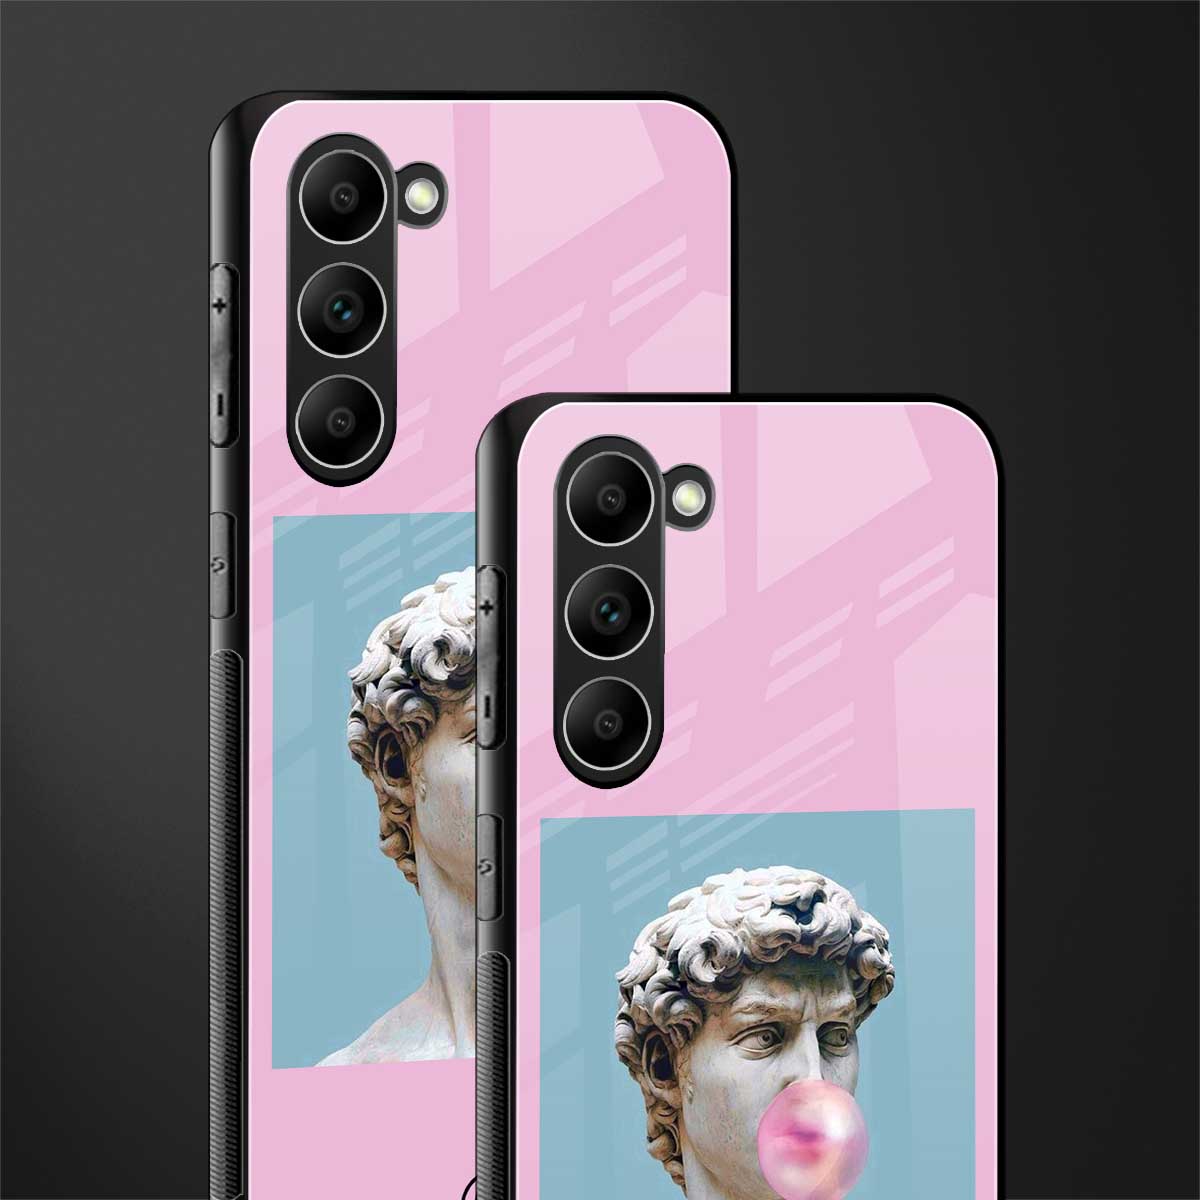 dope david michelangelo glass case for phone case | glass case for samsung galaxy s23 plus